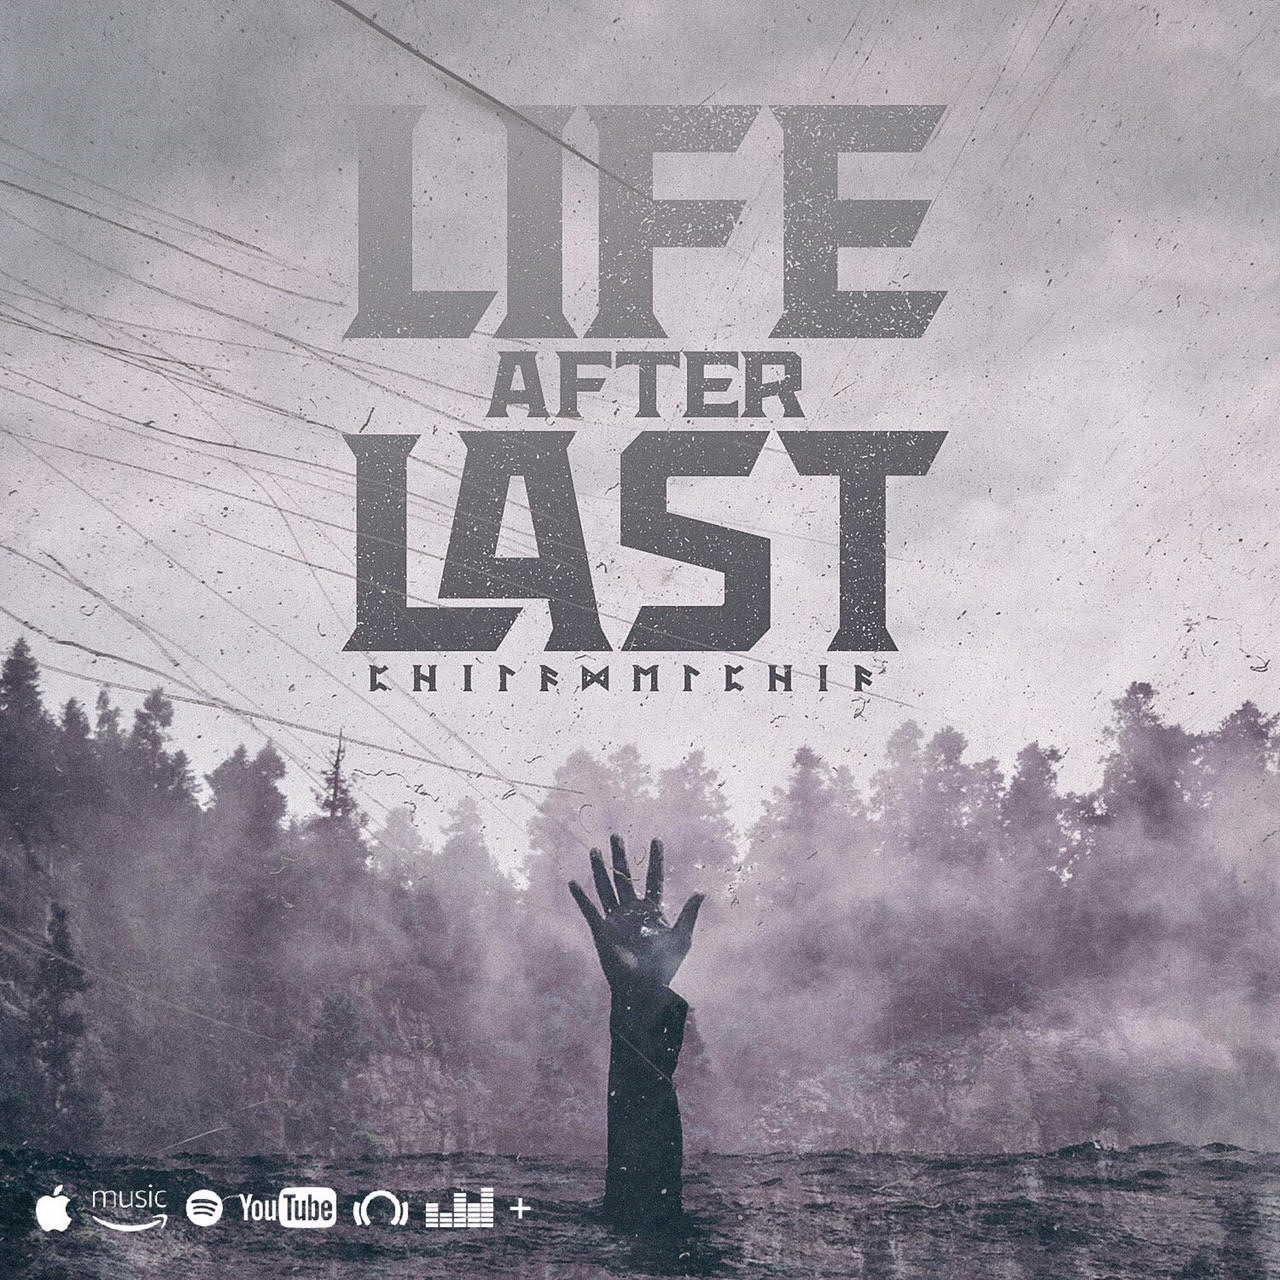 Life after 4. Life after. Лиф Афтер. Автор Лайфа. Life after Life.